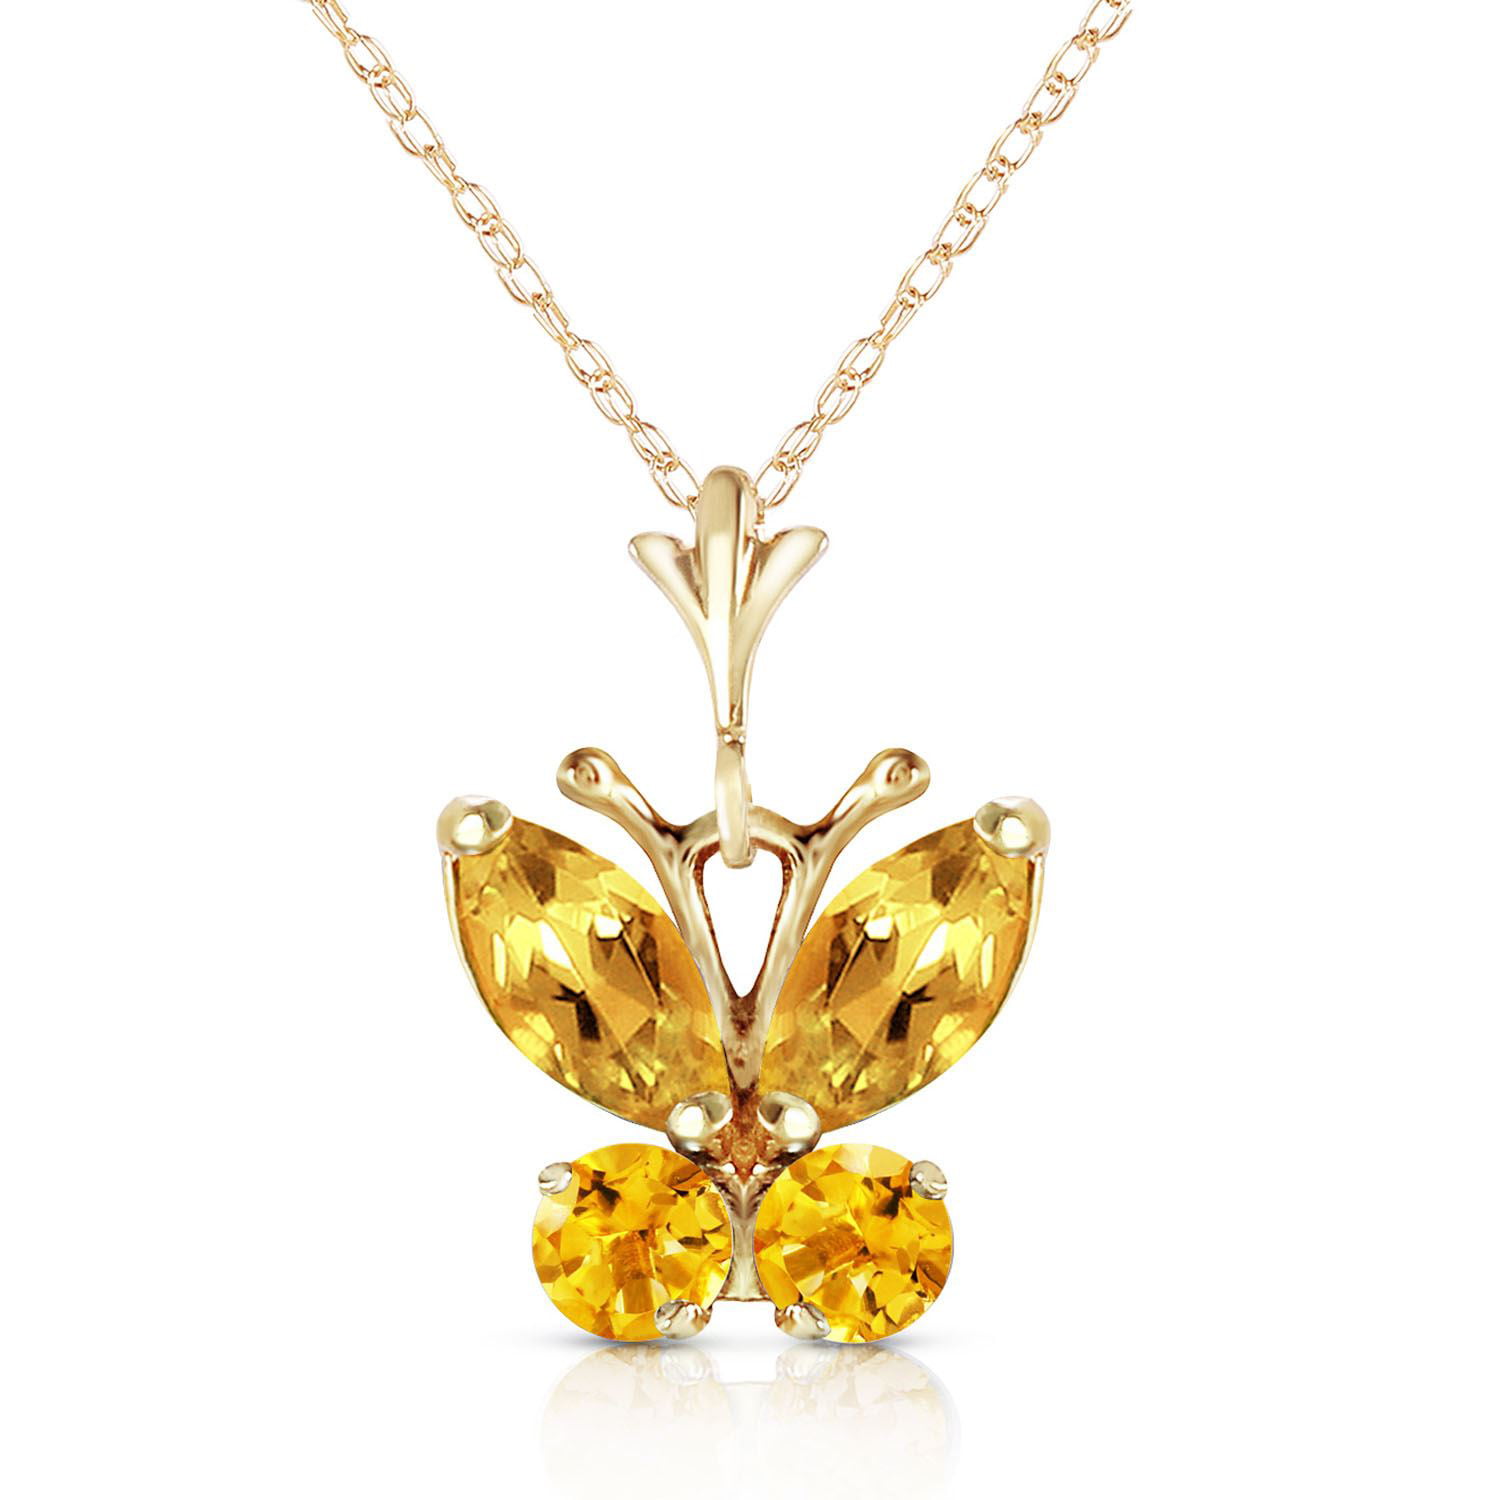 Citrine Peridot with 20 Inch Chain Length ALARRI 2.4 Carat 14K Solid Rose Gold Necklace Blue Topaz